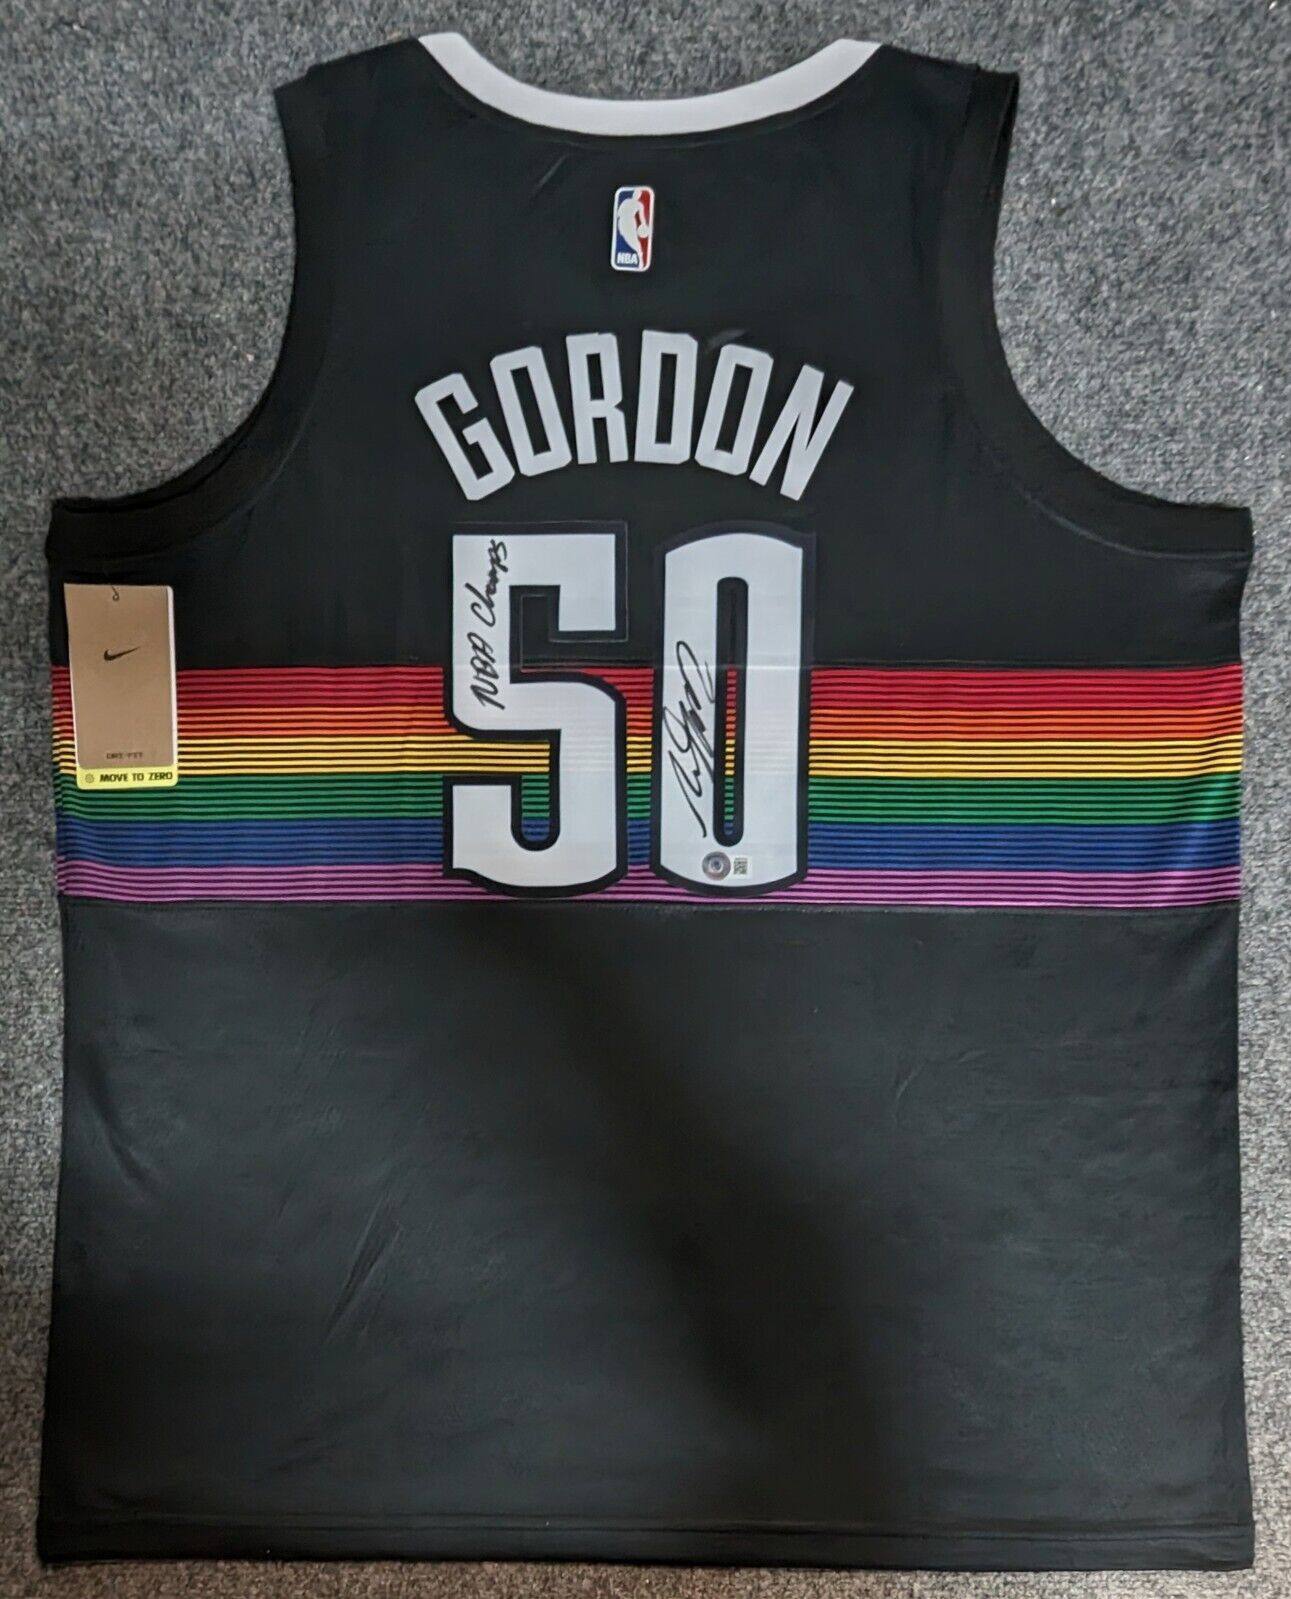 MVP Authentics Denver Nuggets Aaron Gordon Autographed Signed Inscribed Jersey Beckett Holo 337.50 sports jersey framing , jersey framing